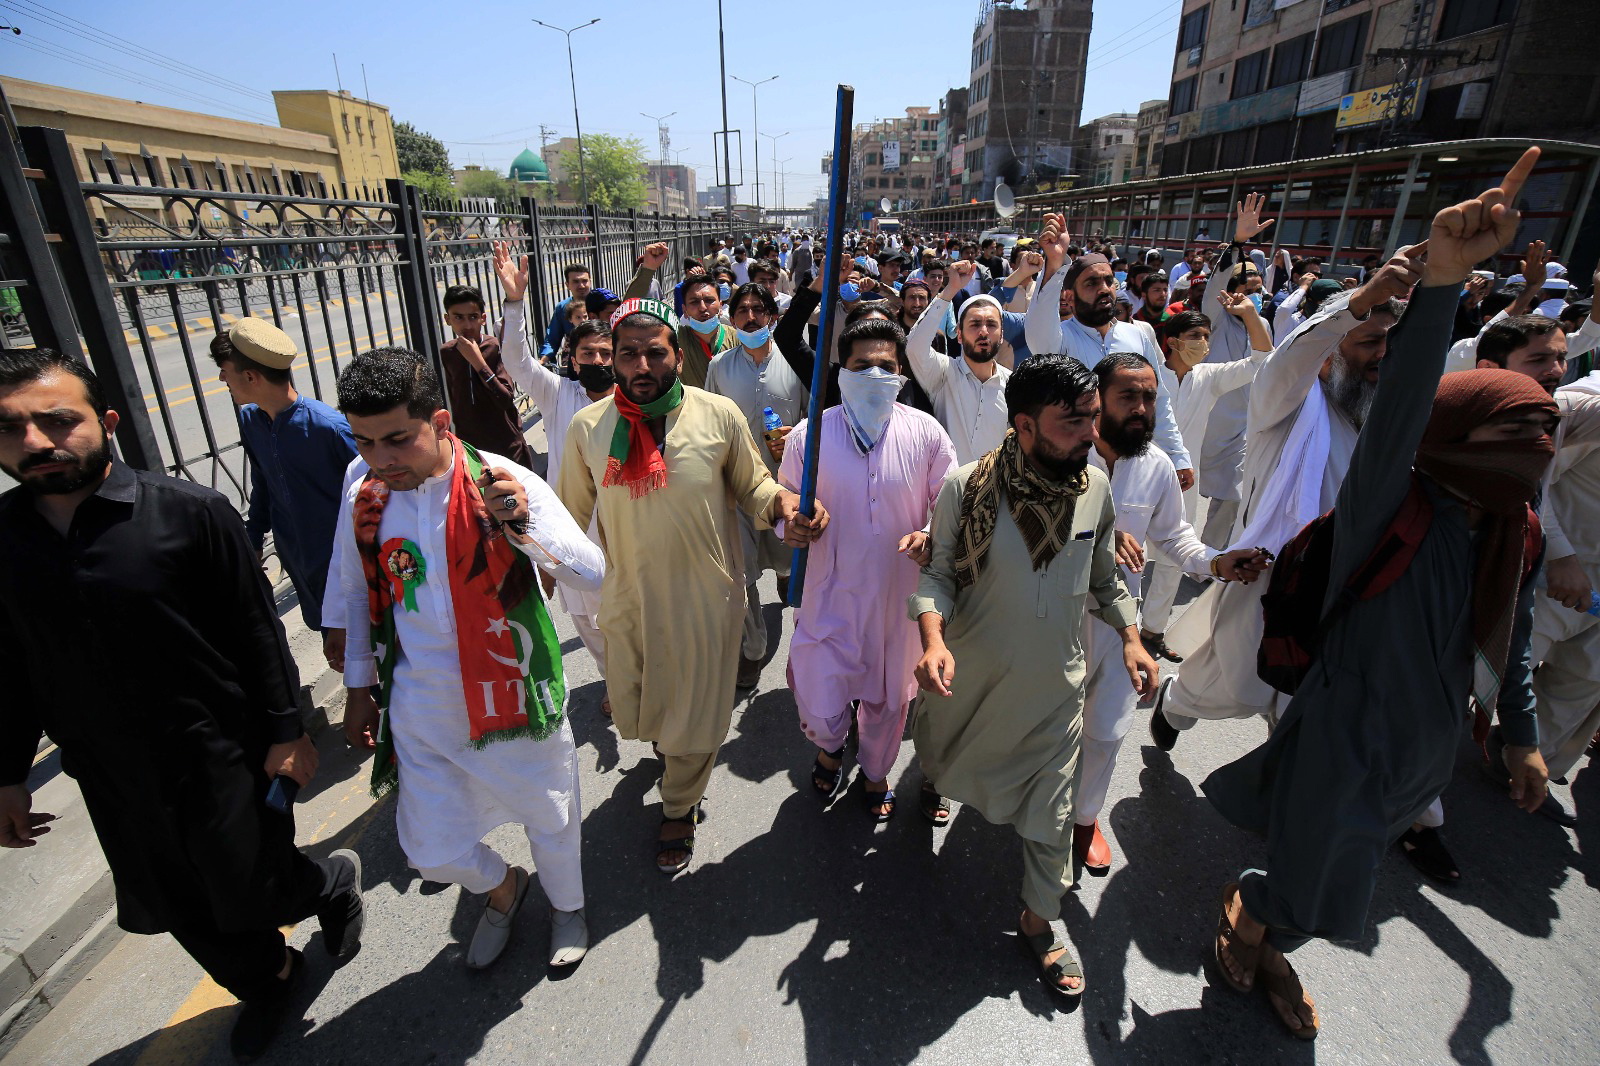 epa10618841 Supporters of Pakistan's former Prime Minister Imran Khan rally following the arrest of the head of the opposition party Pakistan Tehrik-e-Insaf, in Peshawar, Pakistan, 10 May 2023. At least four people died and dozens more were injured on 09 May in disturbances across Pakistan following the arrest of former prime minister Khan, spokespeople for his PTI party said. The government shut down Twitter, Facebook, and YouTube in much of the country, blocking both the internet and mobile data. Authorities suspended the right of assembly in the capital Islamabad and throughout Khan's native province of Punjab. Pakistan Rangers, a paramilitary law enforcement corps, on 09 May apprehended former Prime Minister, Imran Khan, while he was attending a bail hearing in court in Islamabad. Khan, who had been ousted from his position as prime minister by parliament in a vote of no-confidence, is currently facing multiple charges of corruption and terrorism.  EPA/BILAWAL ARBAB